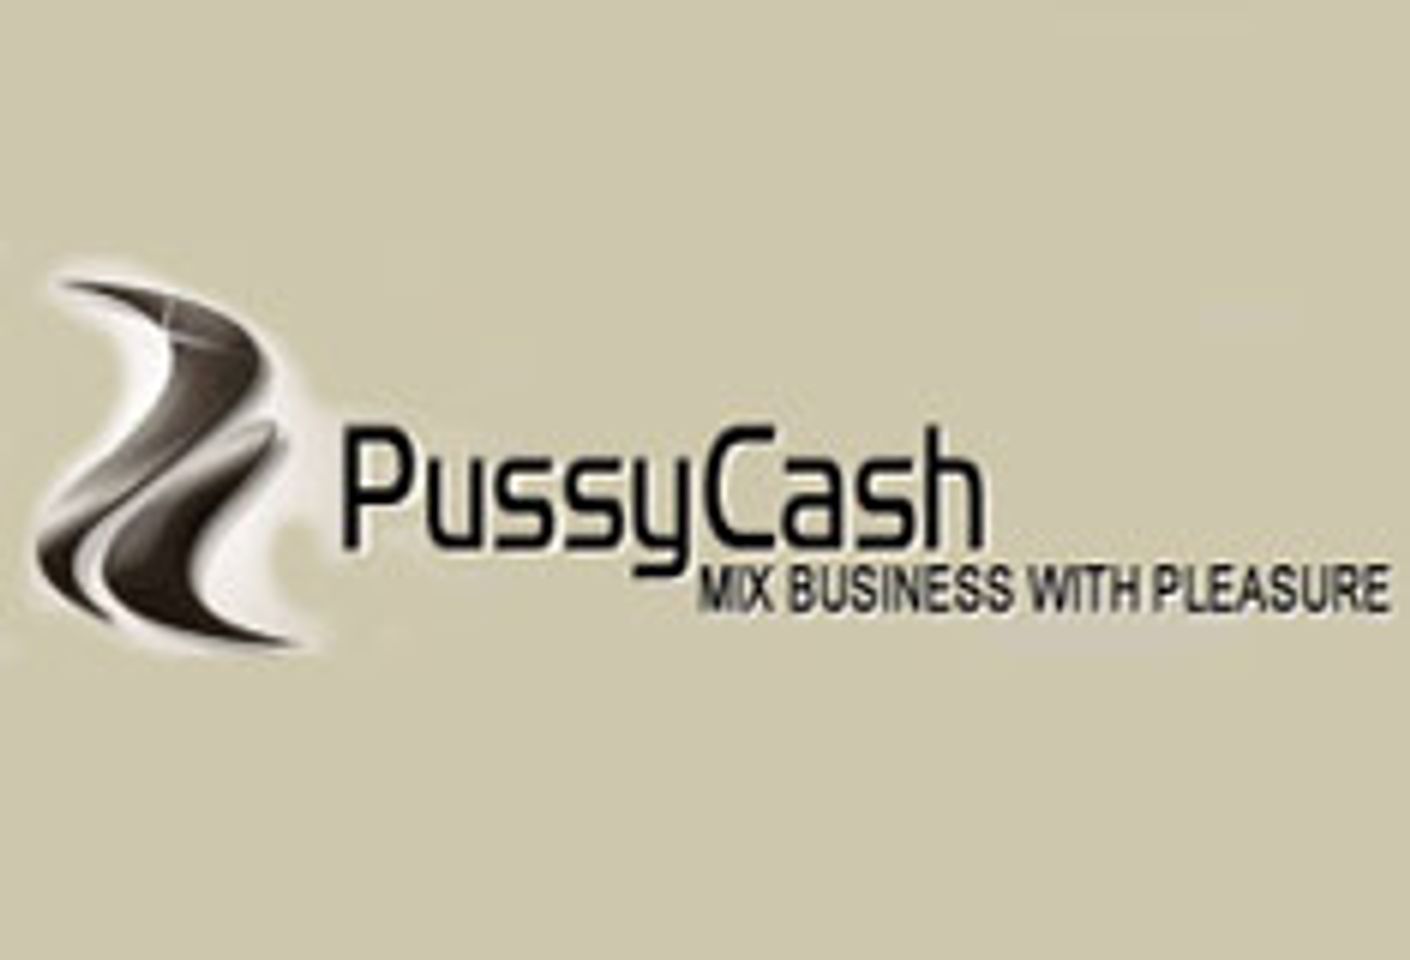 PussyCash Says &#8220;The Mack is Back!&#8221;